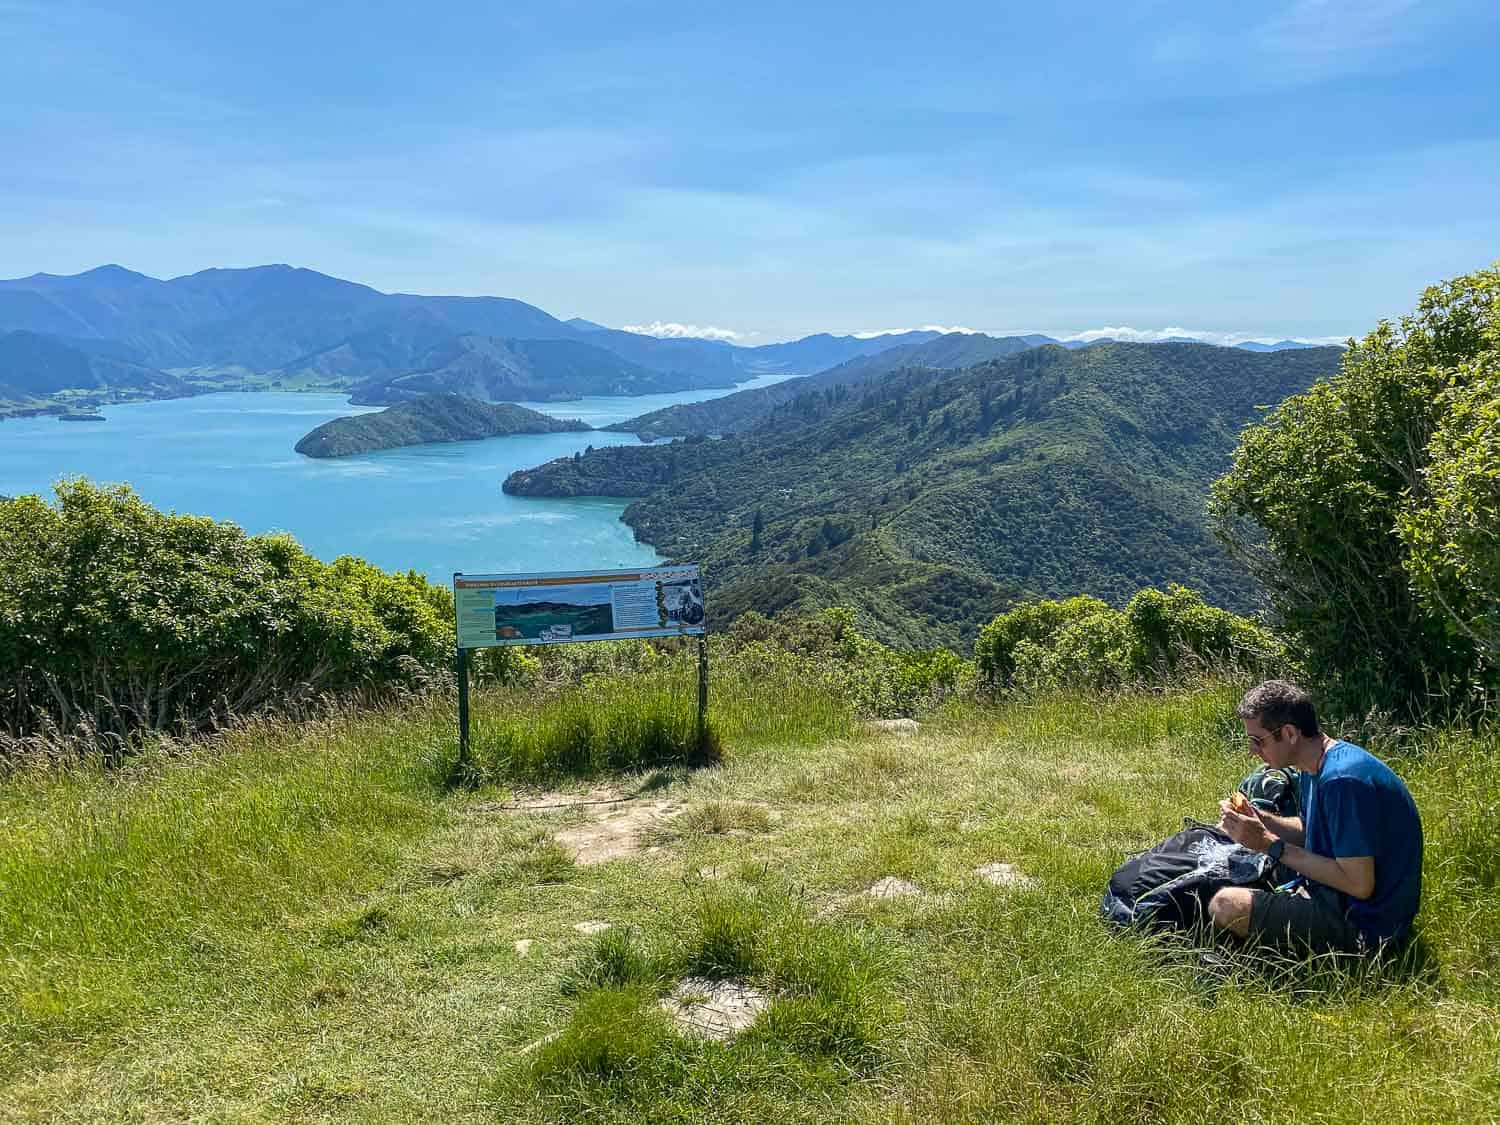 Eating lunch on the grass at the Onaharu Lookout with a view of the Marlborough Sounds on the Queen Charlotte Track